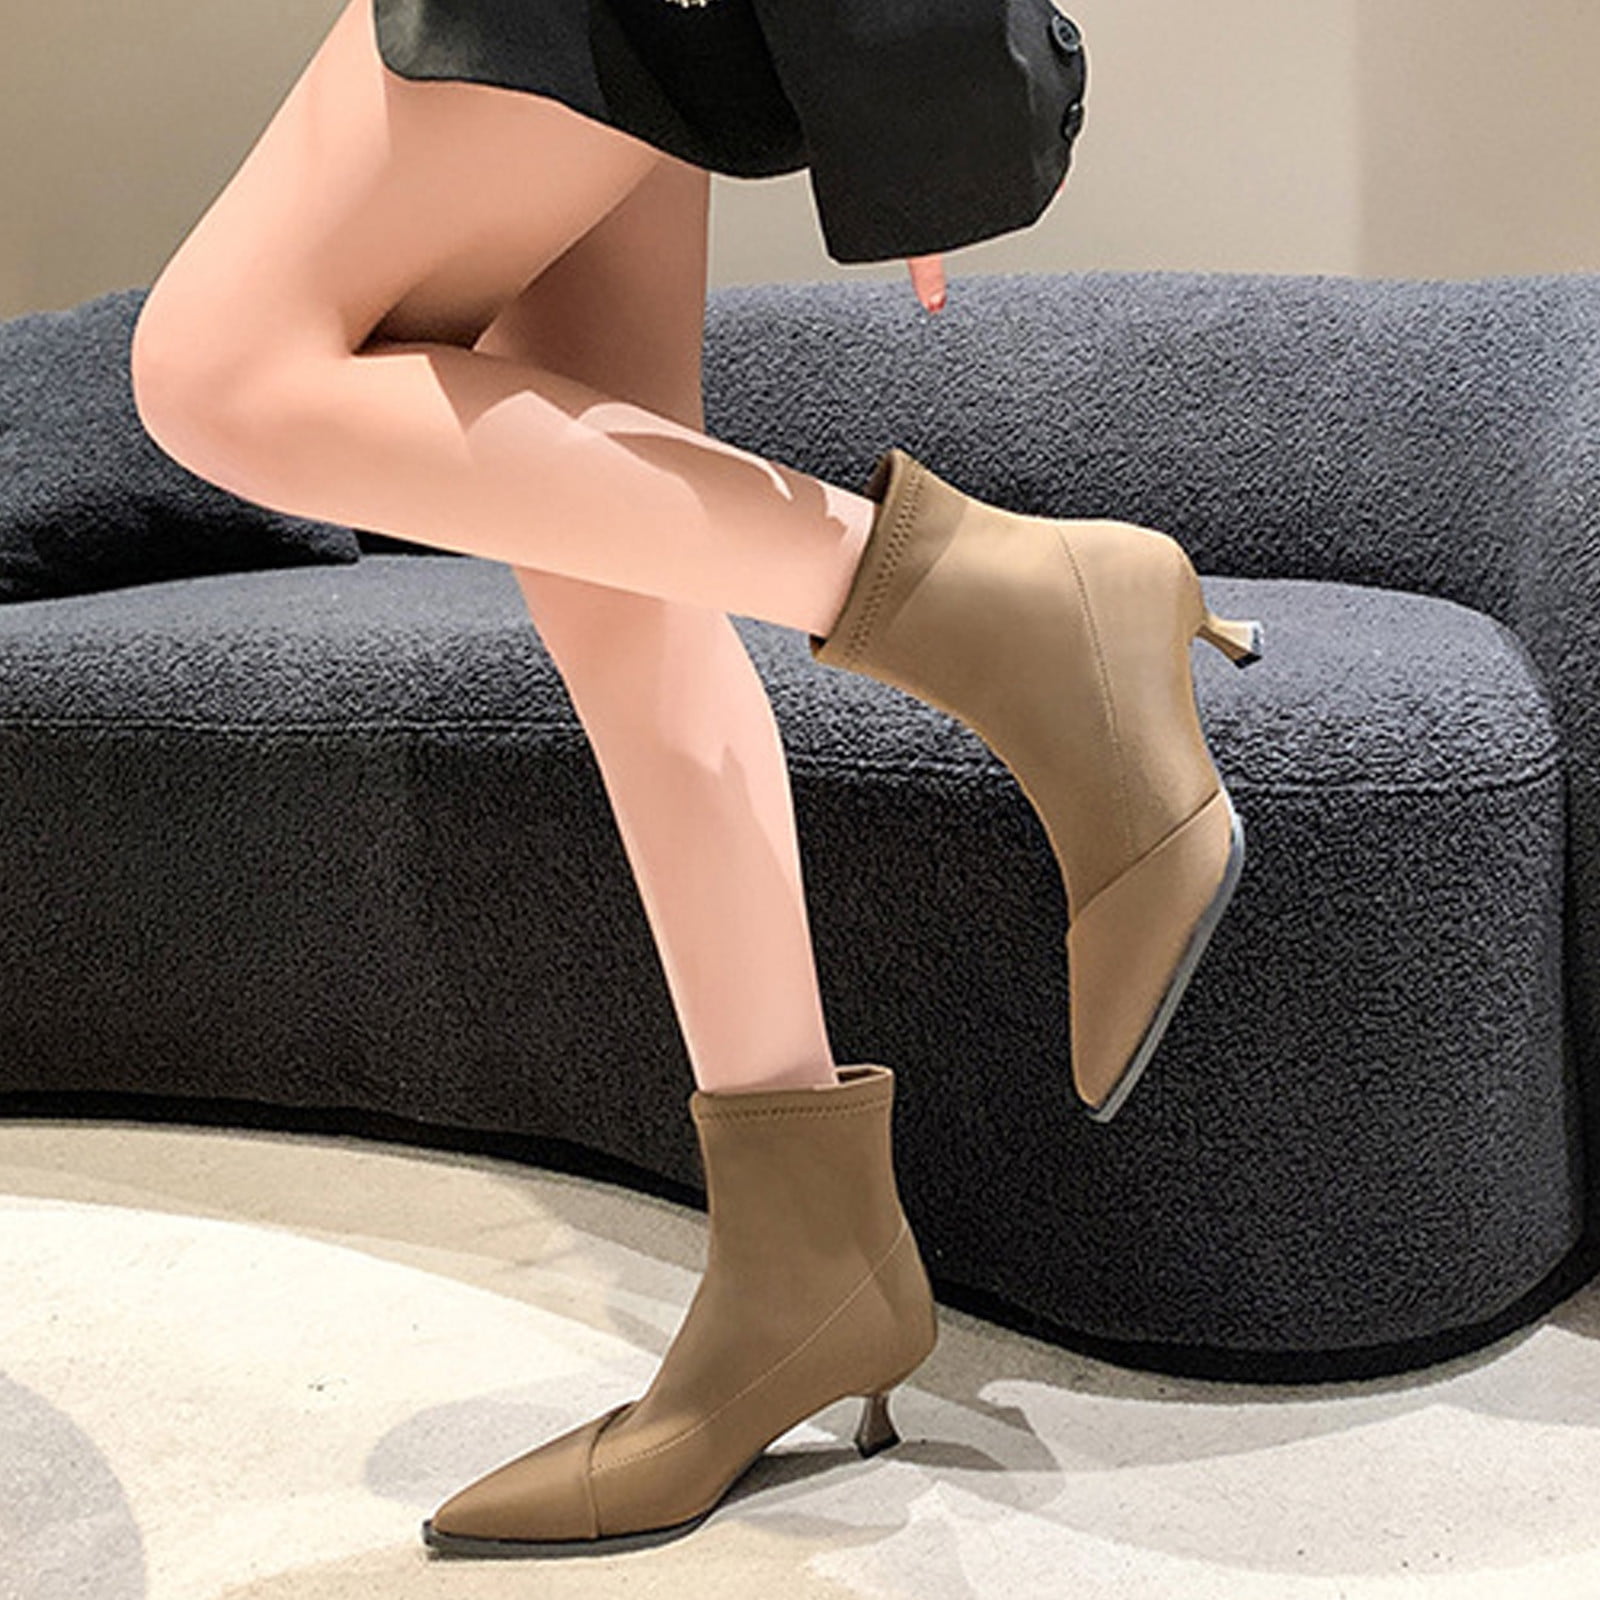 Women's Pointed Toe Stiletto Heel Ankle Boots Stretch Low Heel Booties  Wedding Dress Shoes 